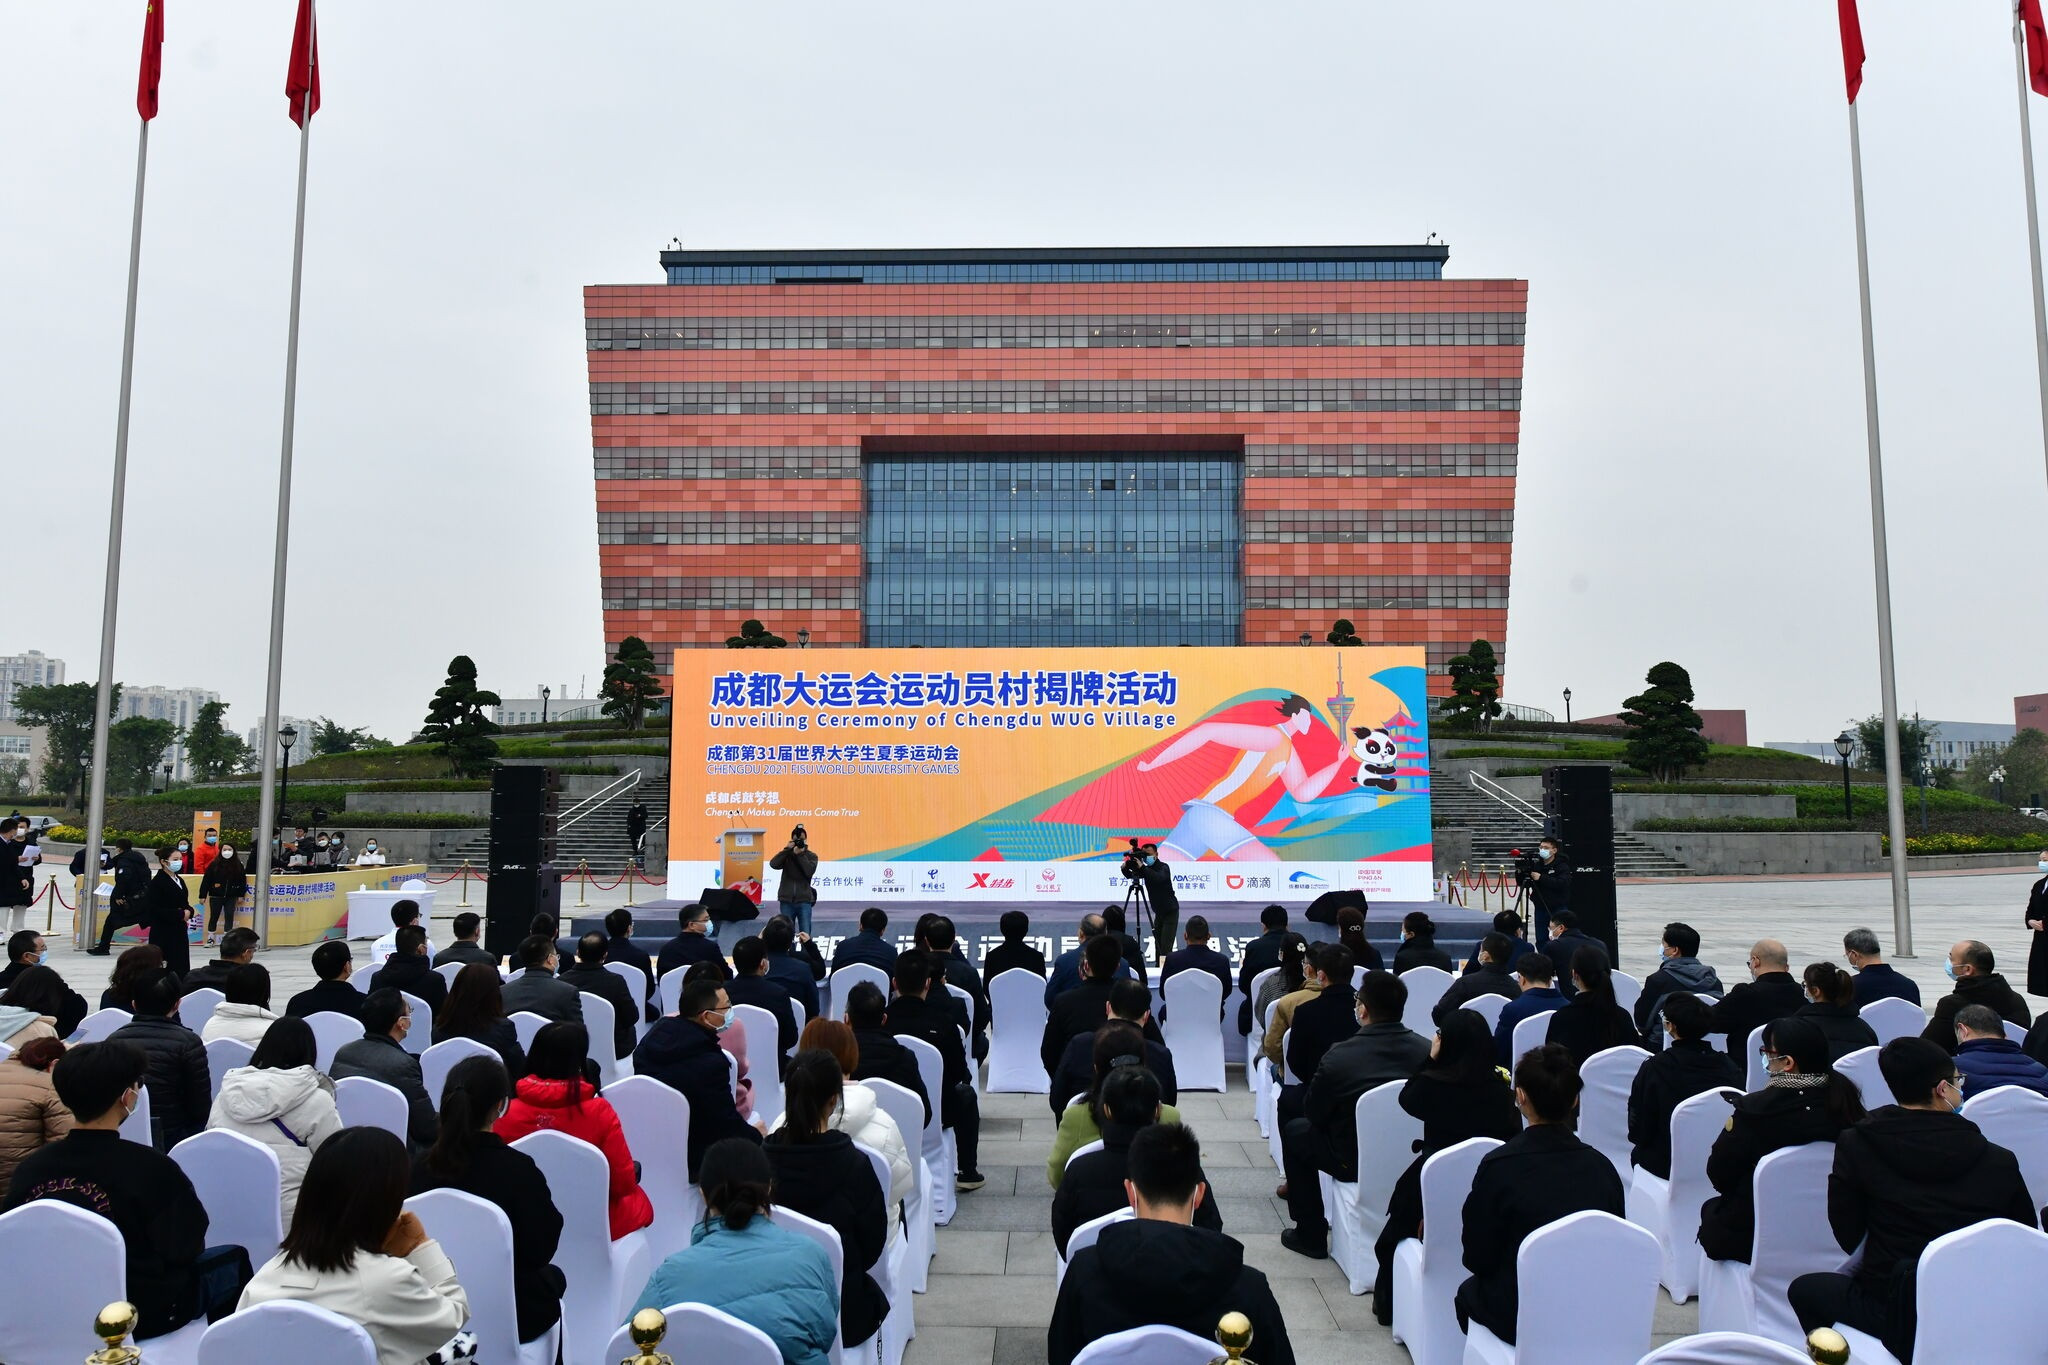 A special ceremony was held to officially unveil the new World University Games Village at Chengdu University ©Chengdu 2021